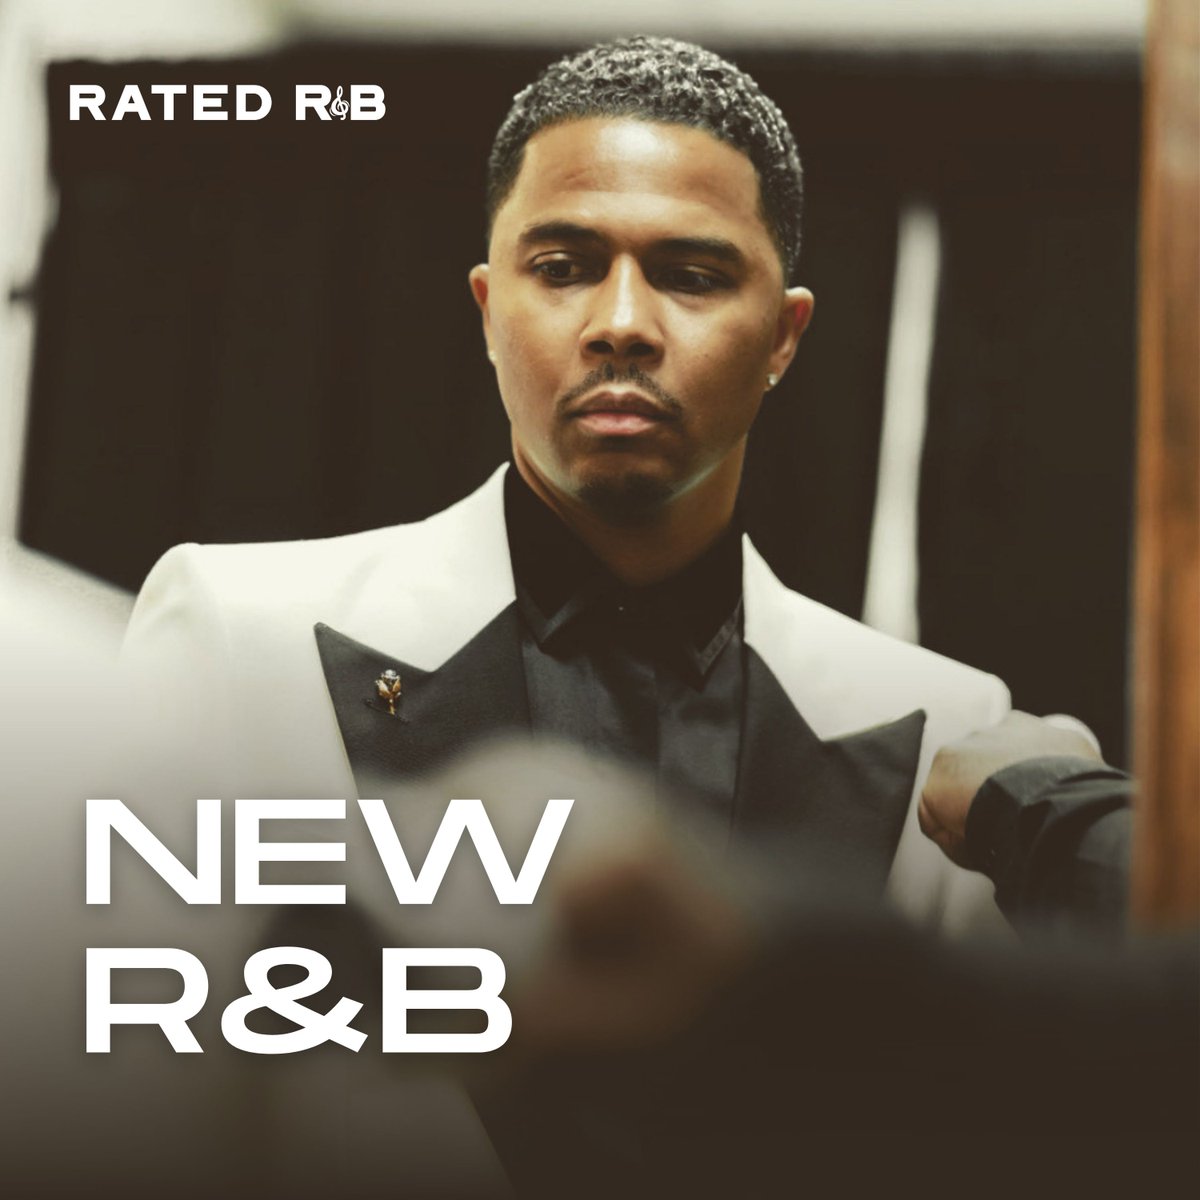 Rated R&B (@RatedRnB) / X